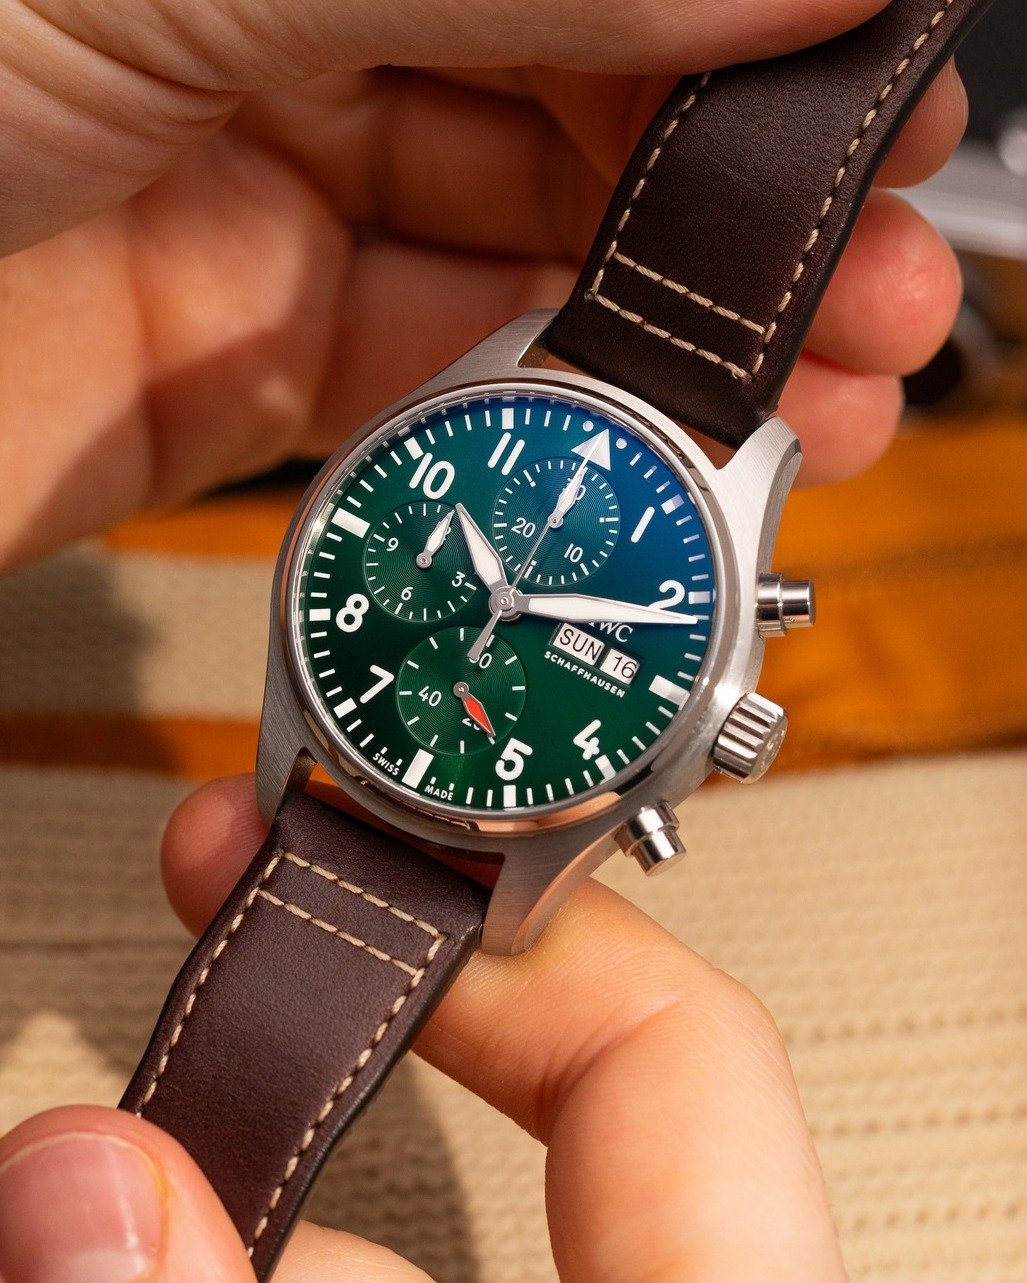 IWC Pilot Watch, IW388103 - W011221

Buy, Sell and Consign your watch with us. Message us for more information or visit us online thewatchbarn.com 

 #iwc #IWC #iwcpilot #IWCWatches #iwcwatches #watchesuk #thewatchbarnbychrono24 #thewatchbarn #chrono